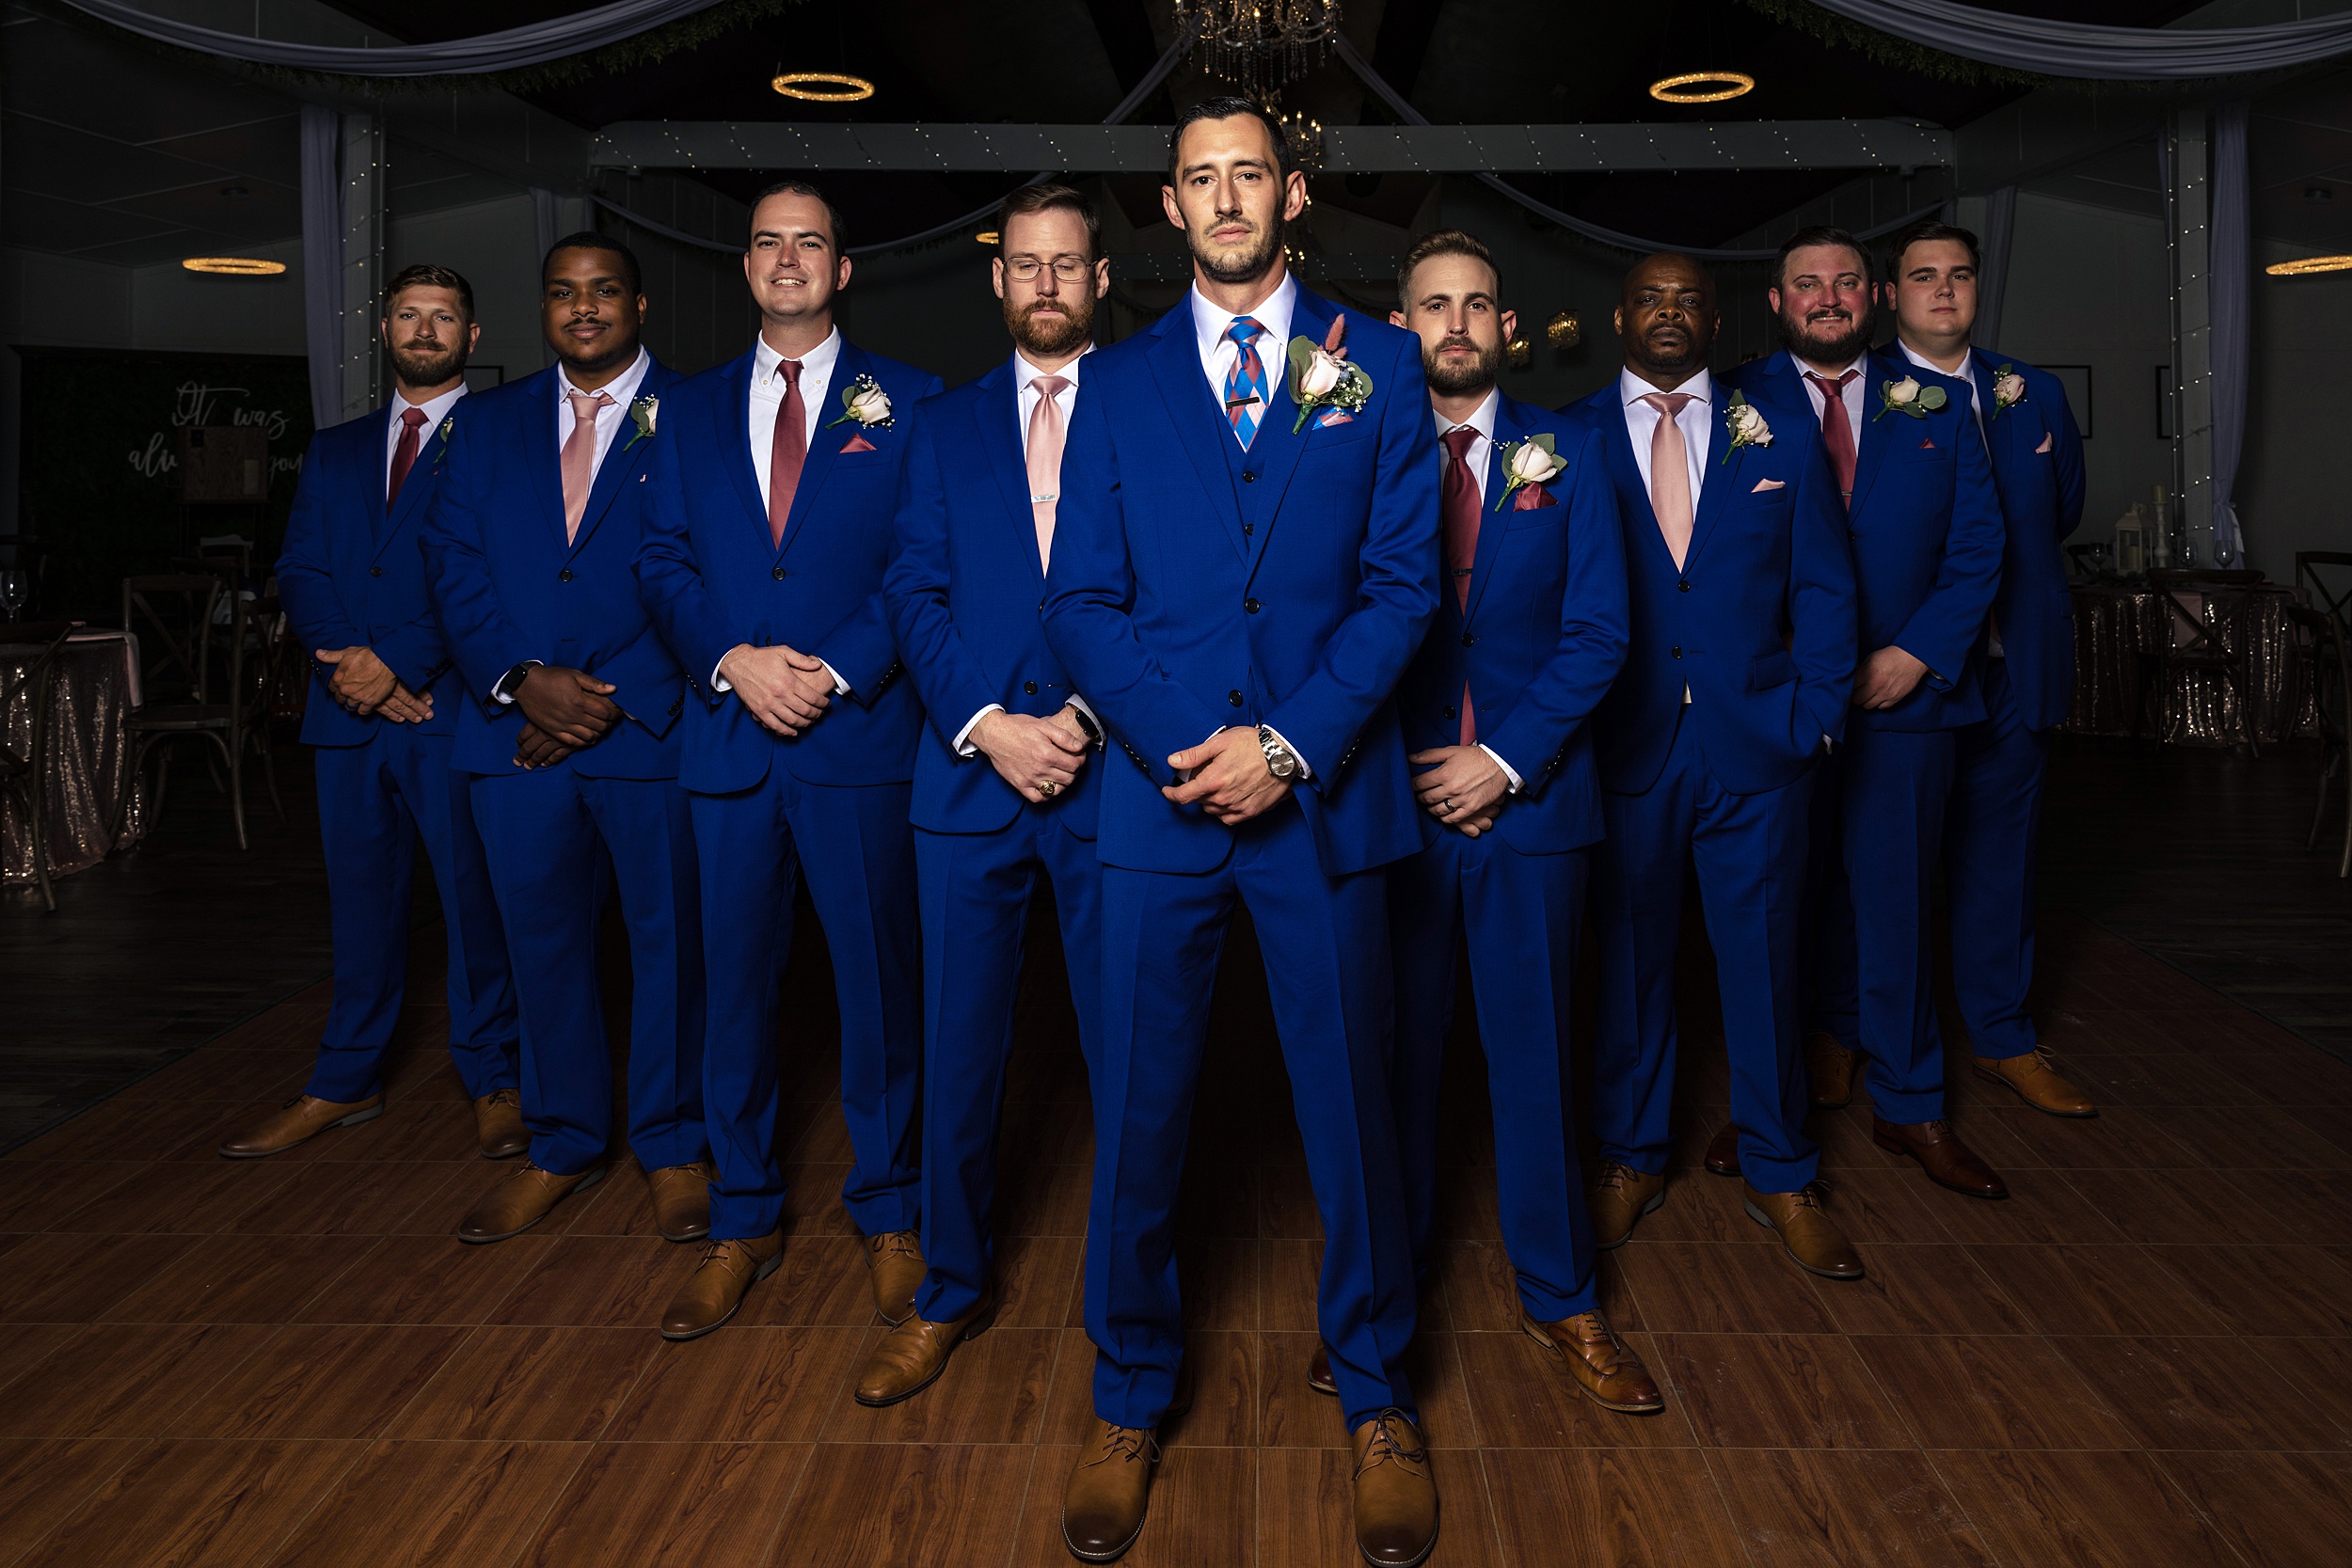 A groom stands with his large party of groomsmen with hands crossed in a V formation